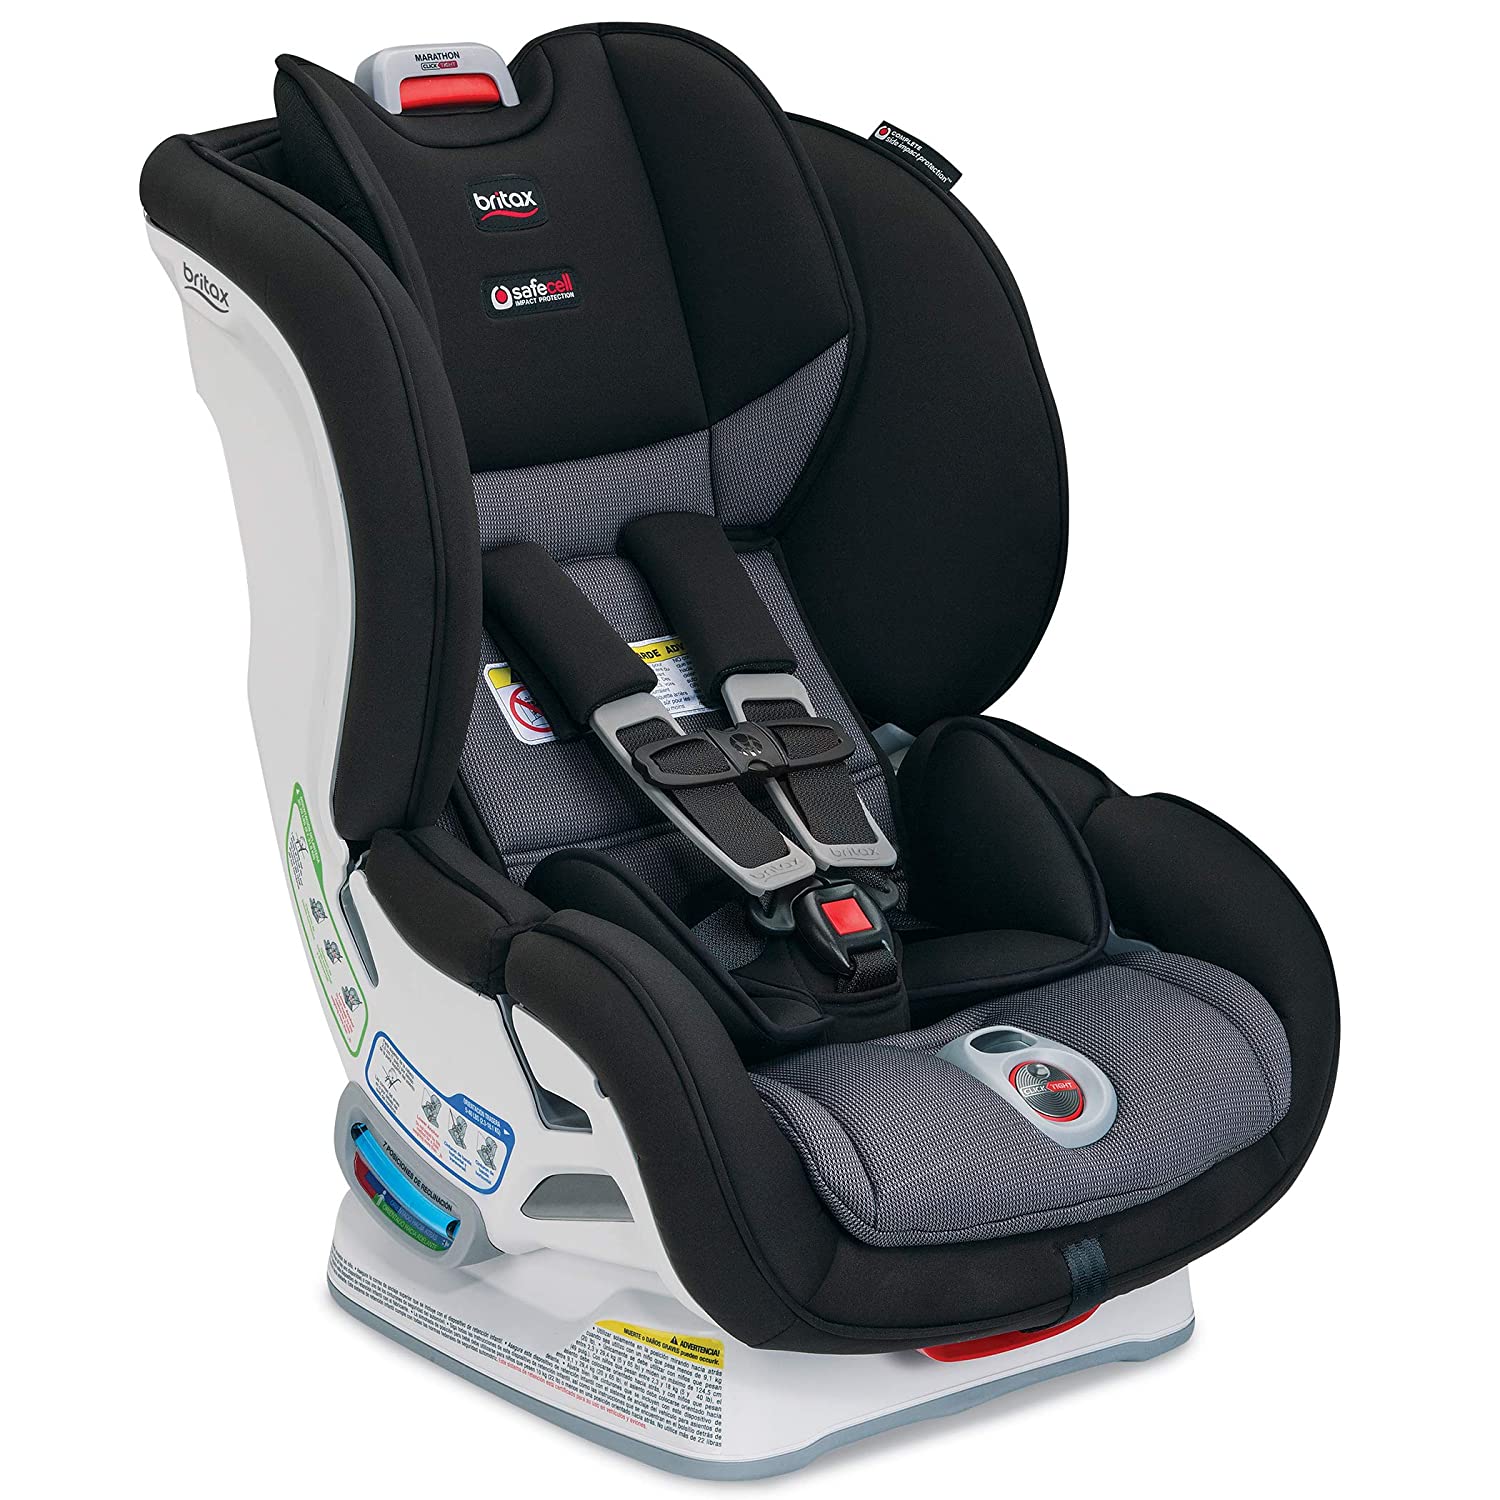 Top 5 Best Affordable Convertible Car Seats Reviews in 2022 4